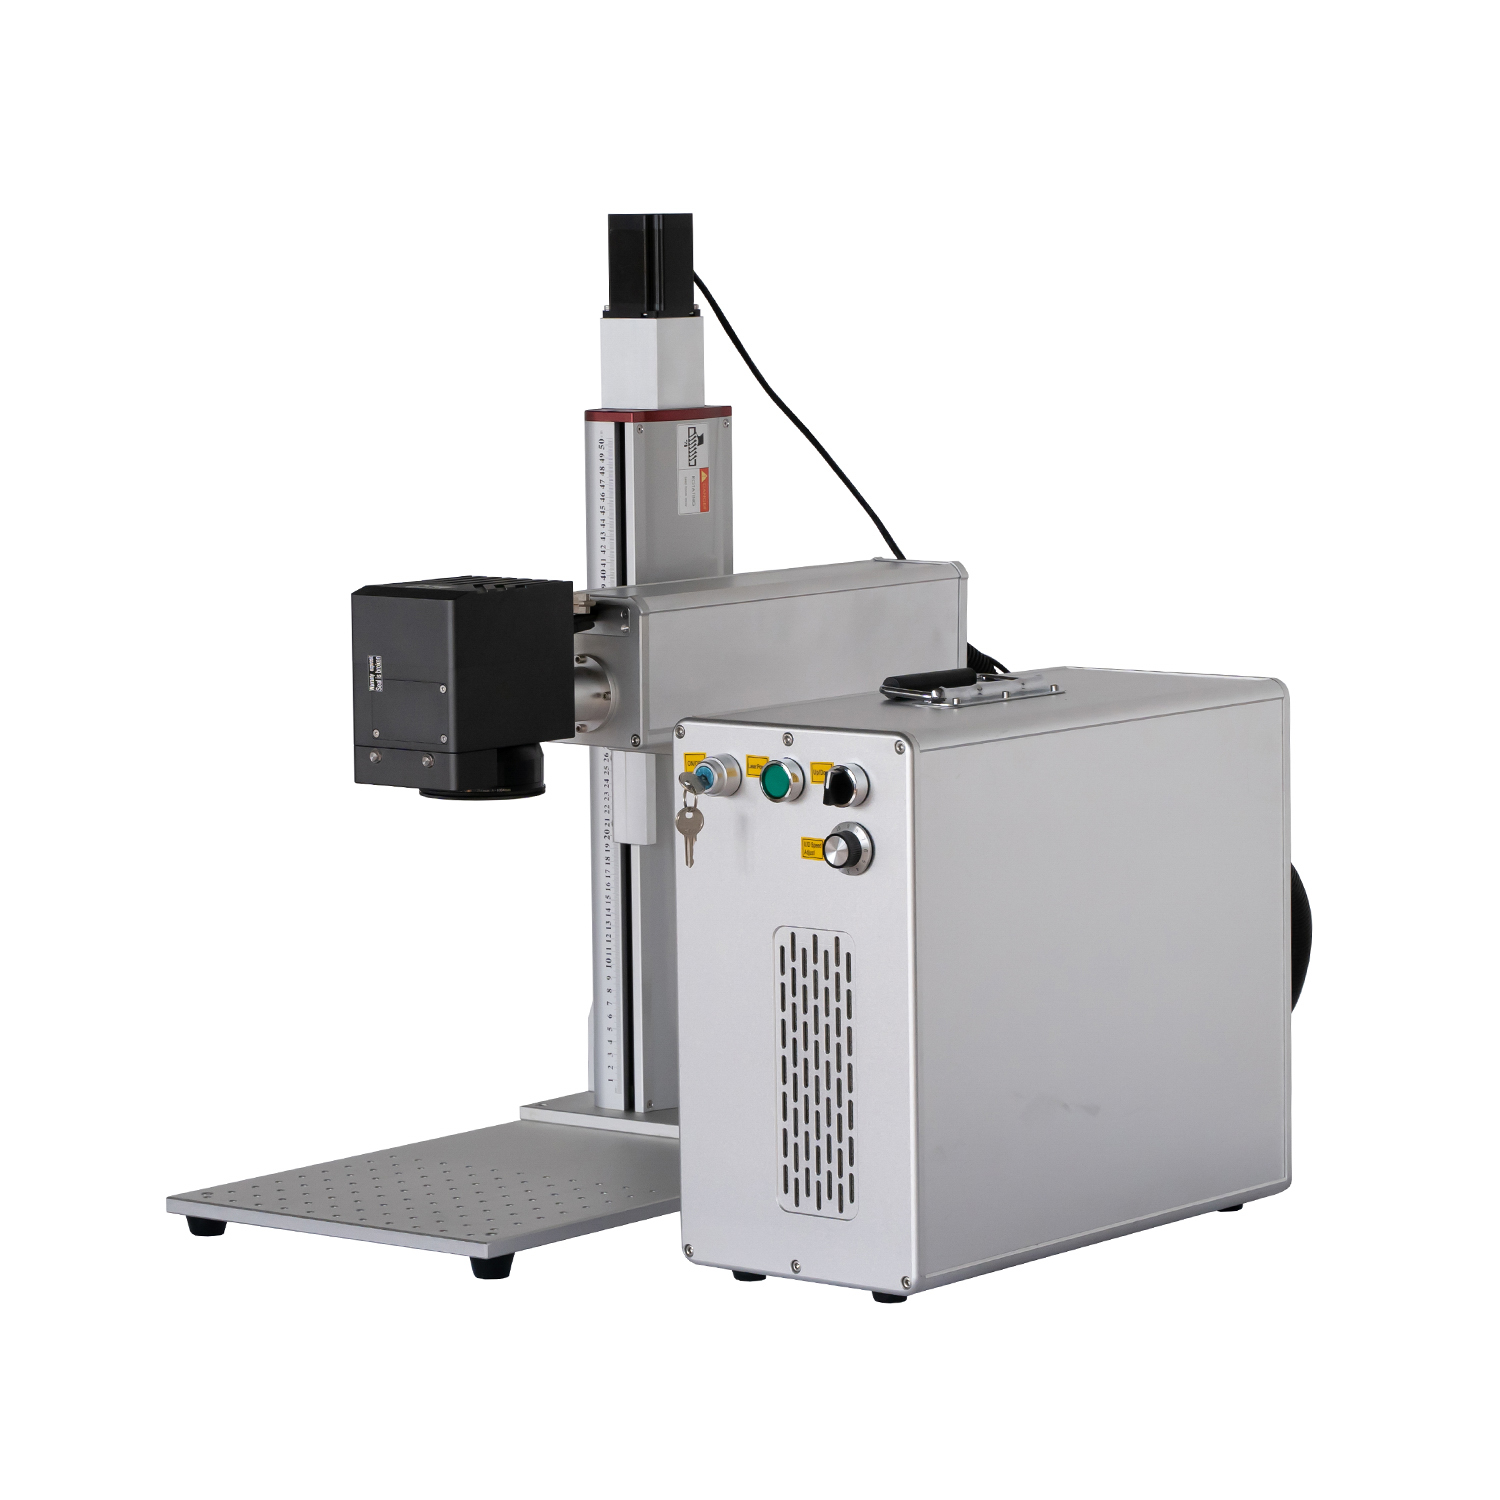 position mark UV/ fiber laser marking machine with cyclops camera for designated place engraving